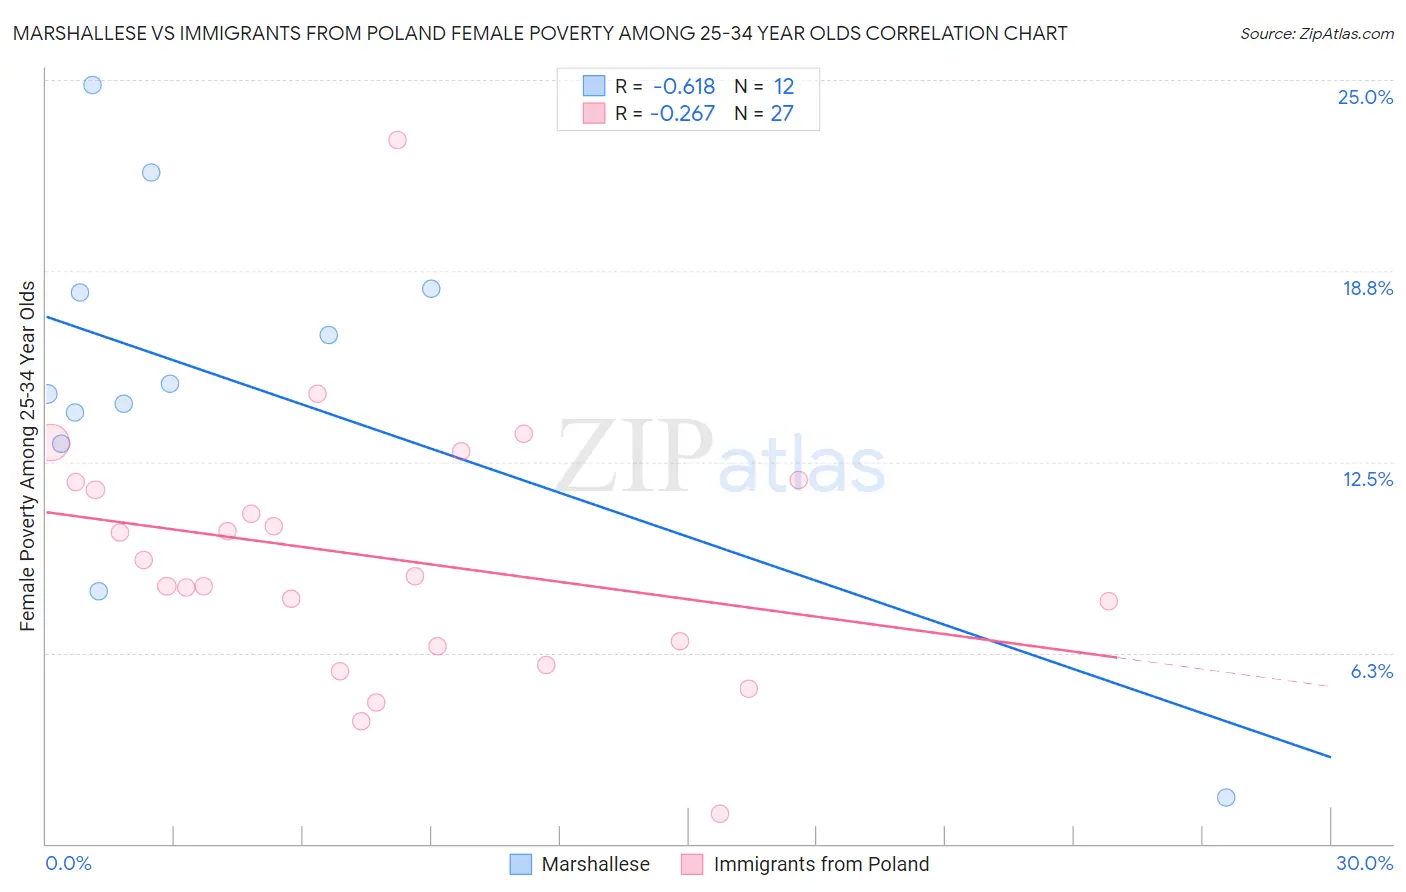 Marshallese vs Immigrants from Poland Female Poverty Among 25-34 Year Olds